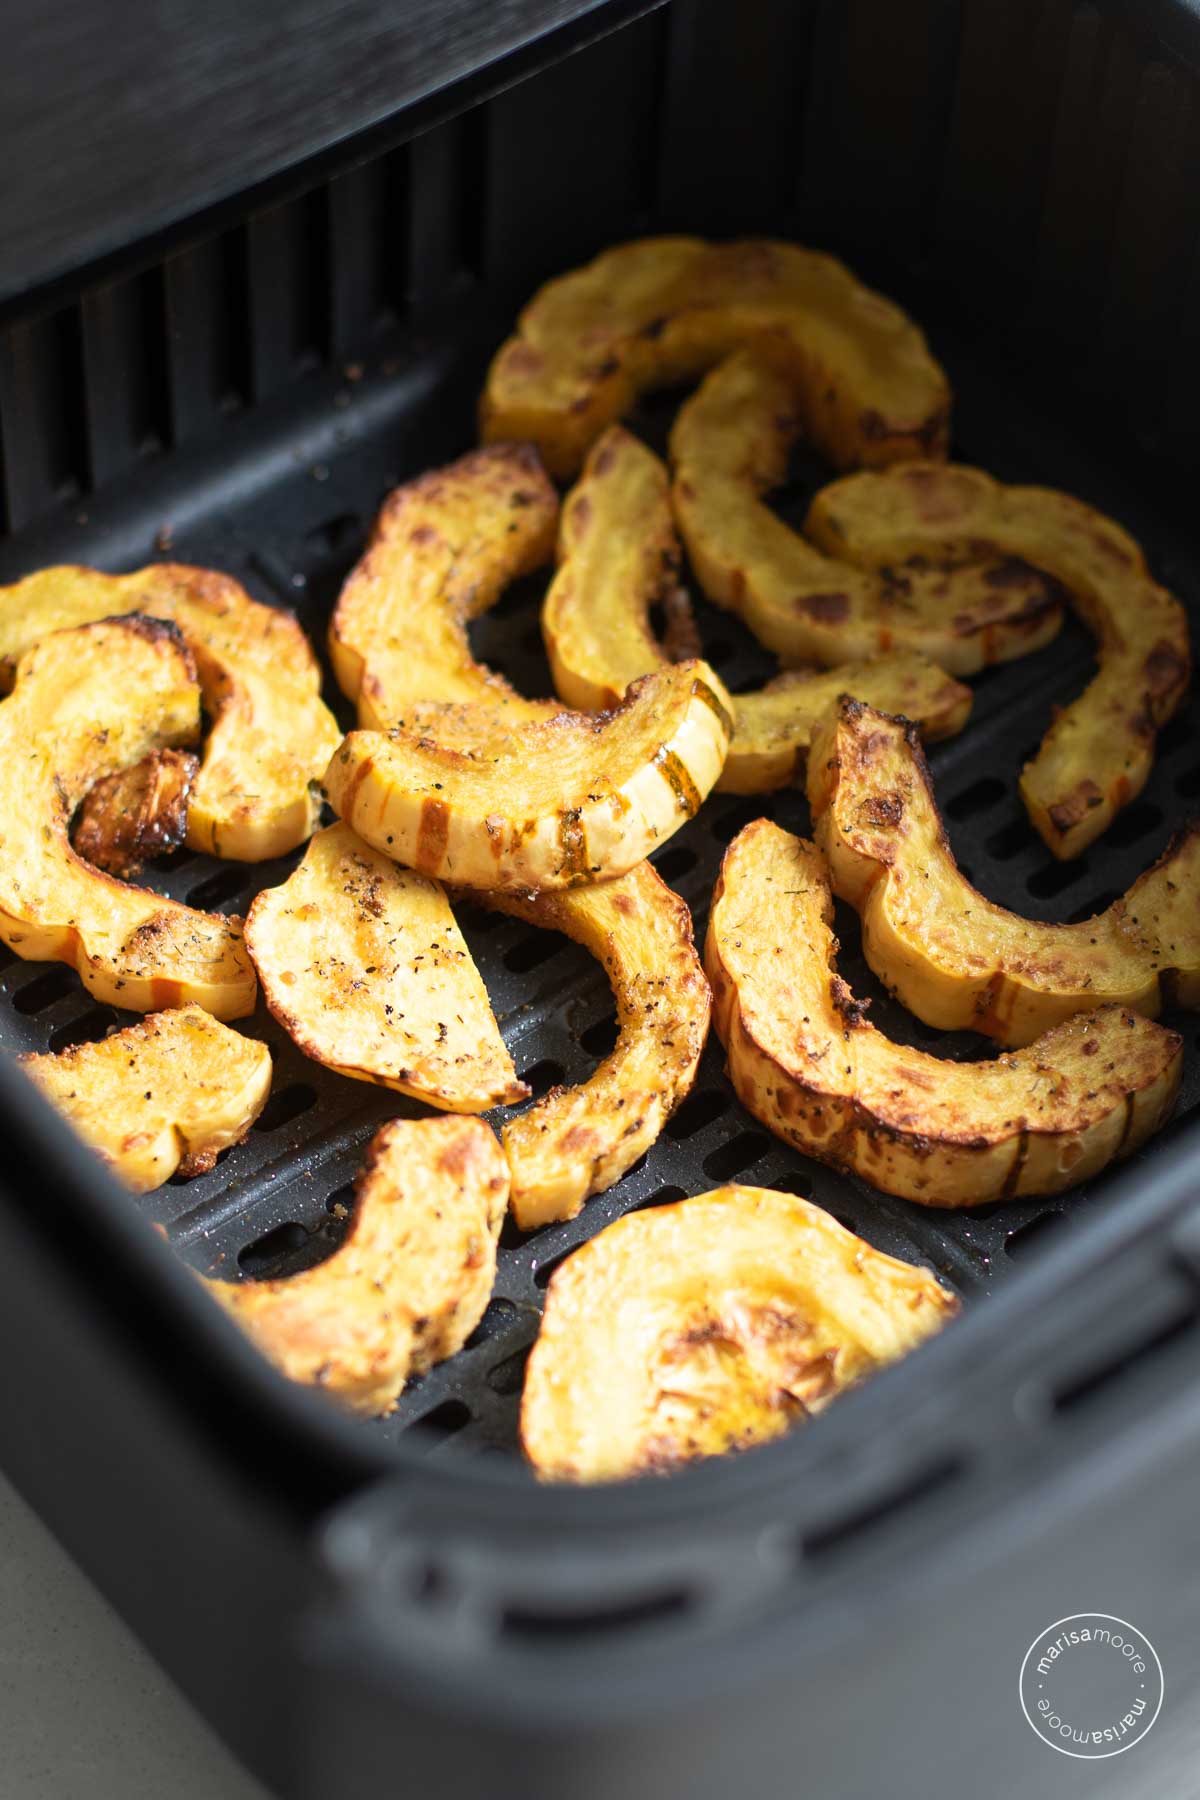 Cooked delicata squash in the air fryer basket